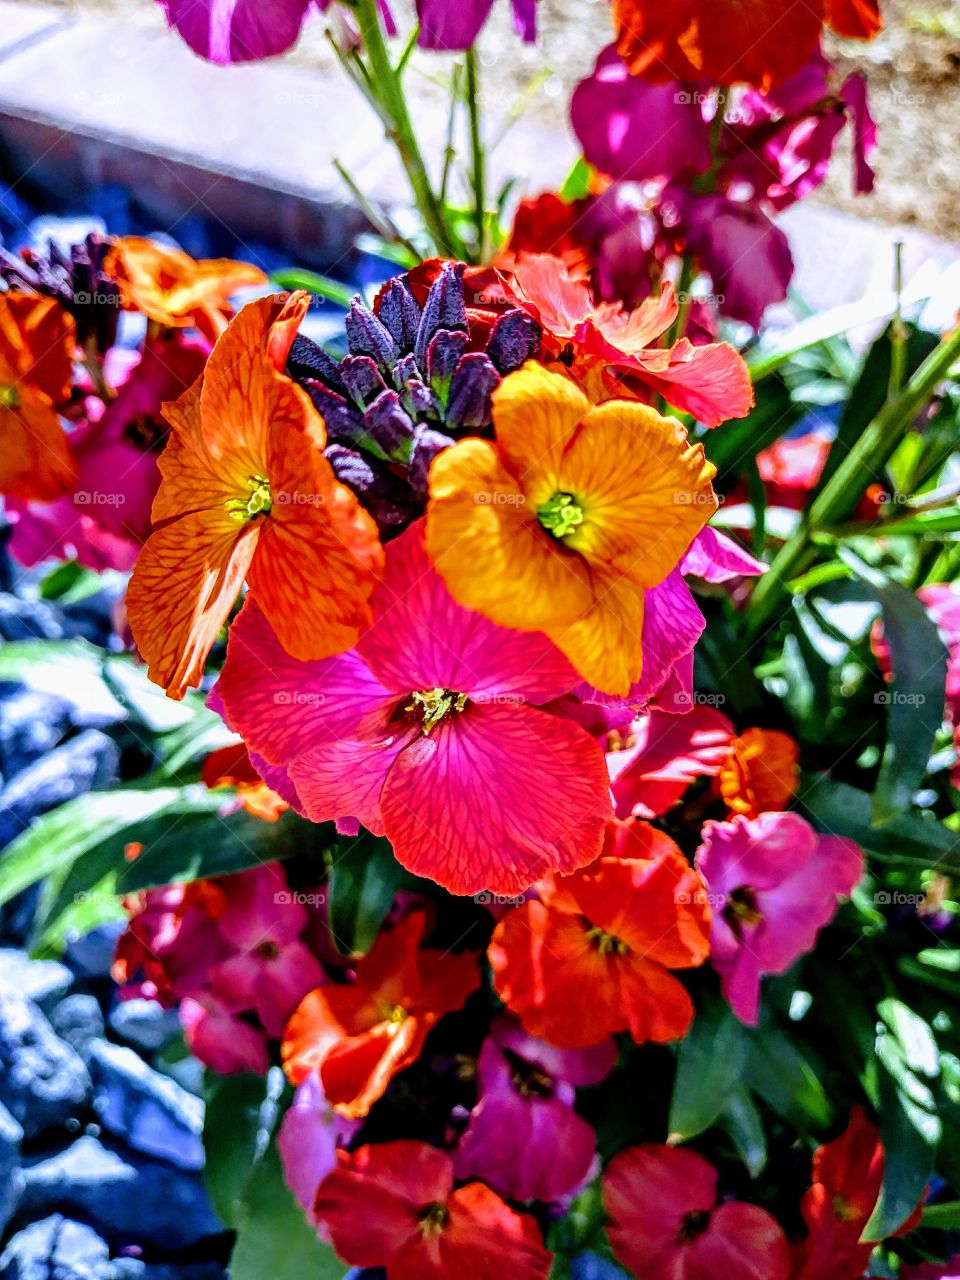 pink and orange flowers growing together. blooming on a bright sunny spring day